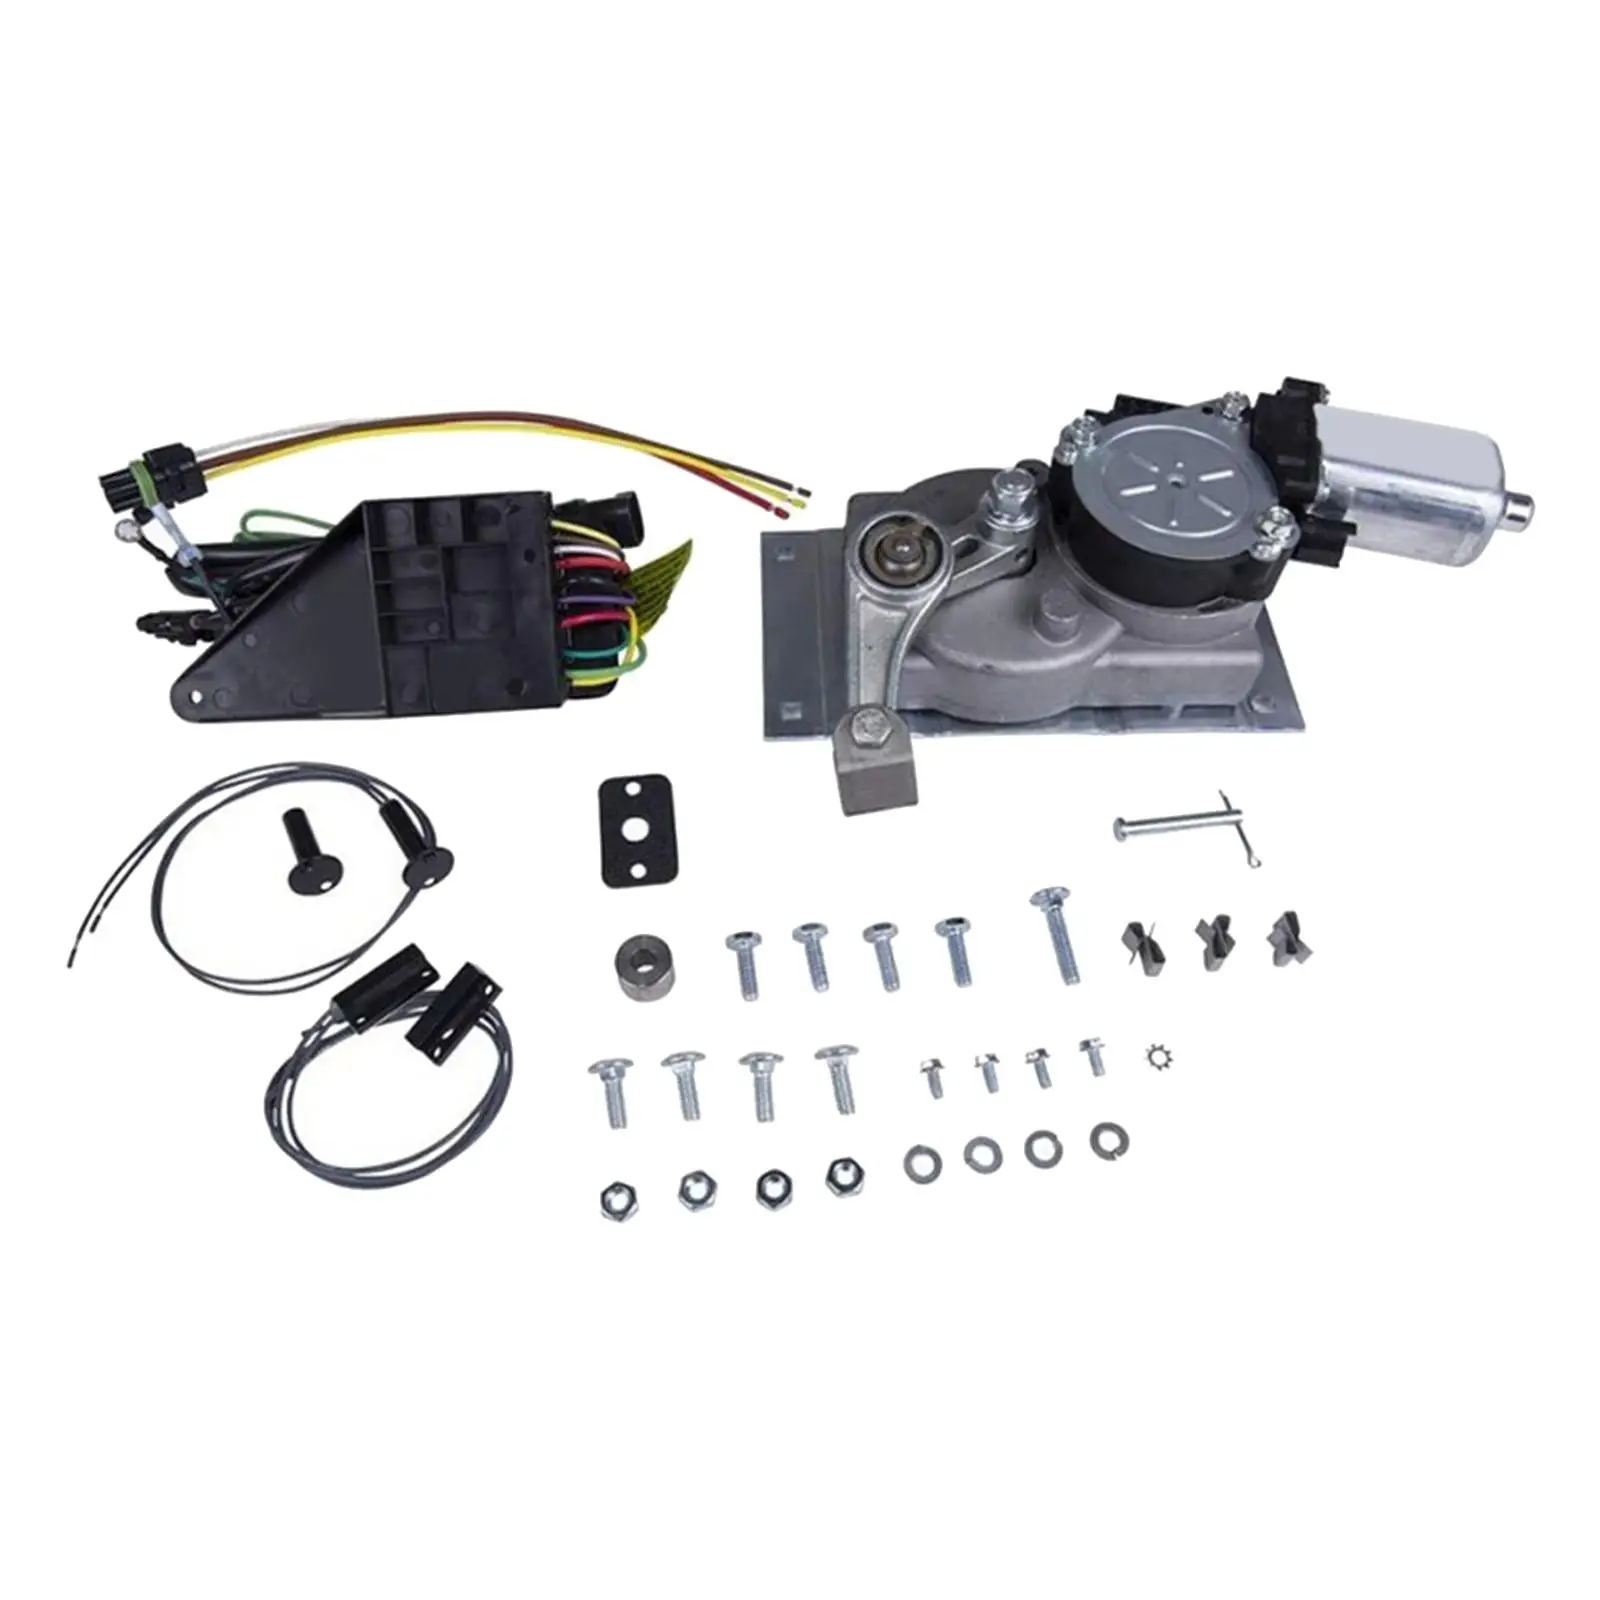 RV Step Motor Replacement Motor Conversion Kit for Motorhomes Rvs Truck